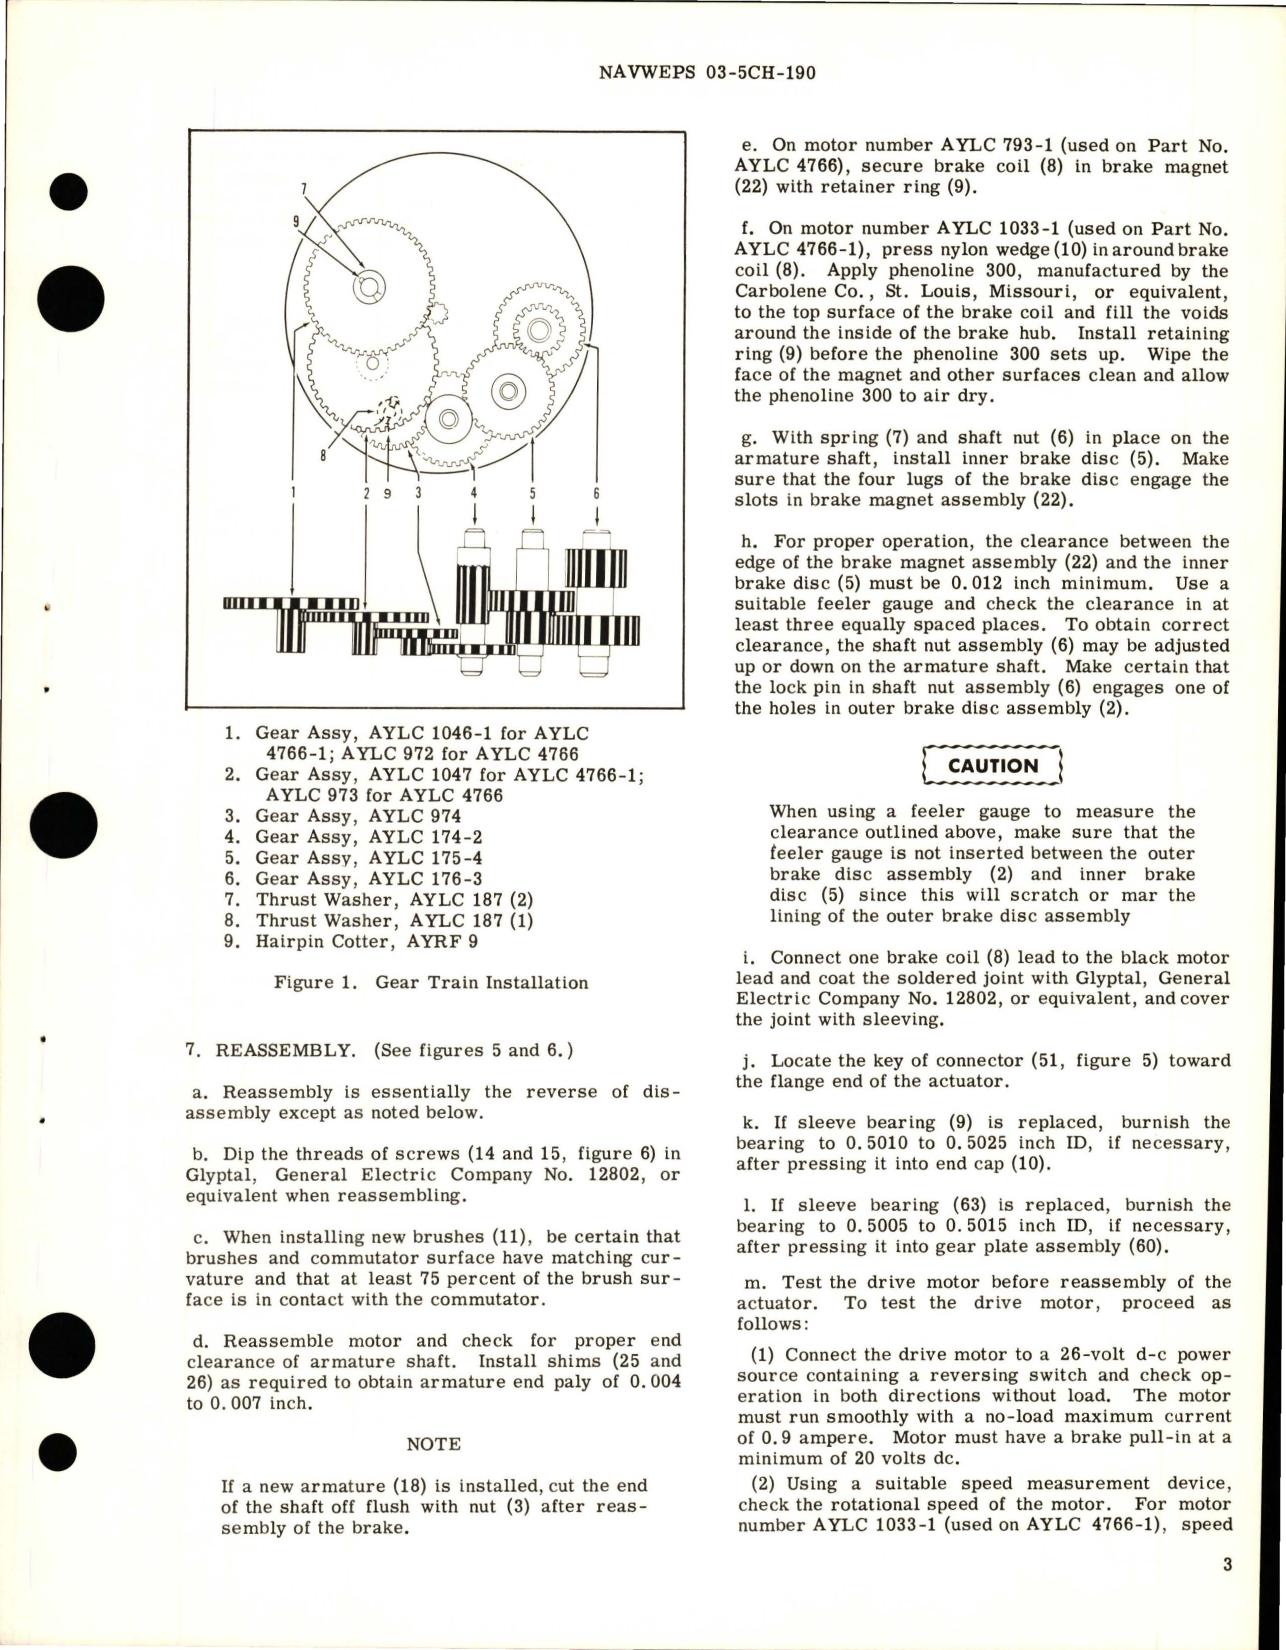 Sample page 5 from AirCorps Library document: Overhaul Instructions with Illustrated Parts Breakdown for Rotary Electromechanical Actuator - Part AYLC 4766, 4766-1